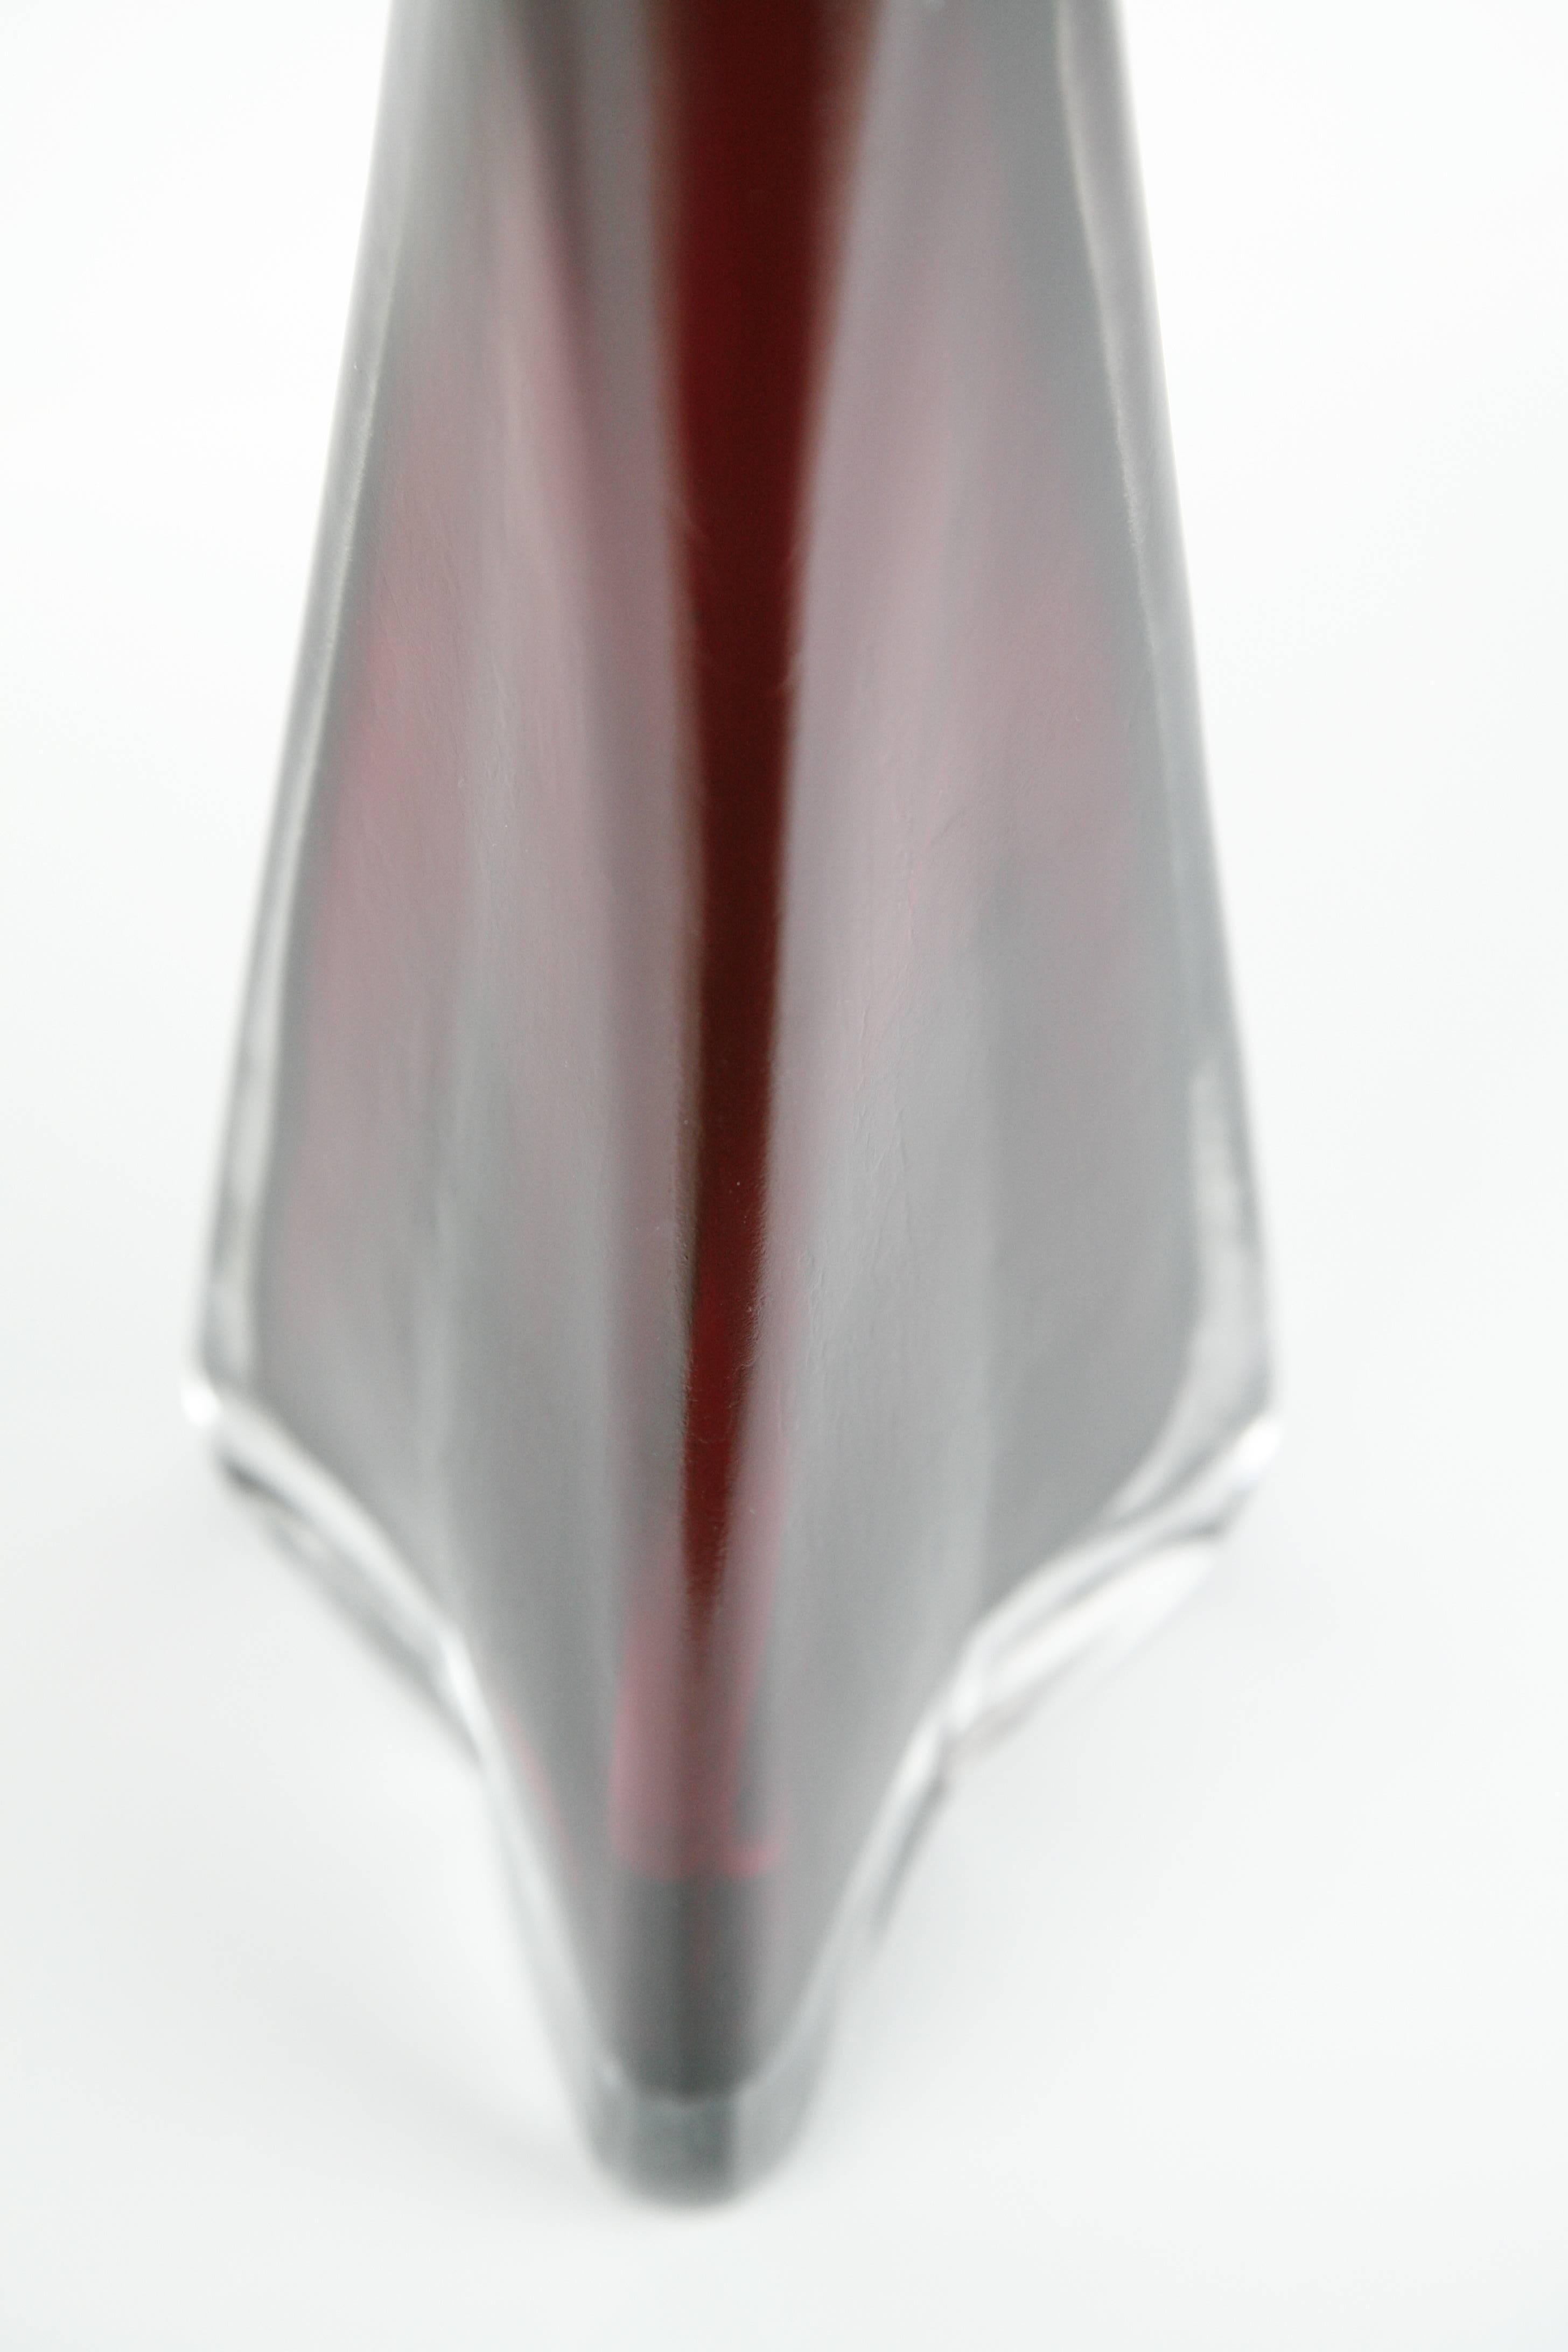 Cast Ruby Red Triangular Orrefors Lamp